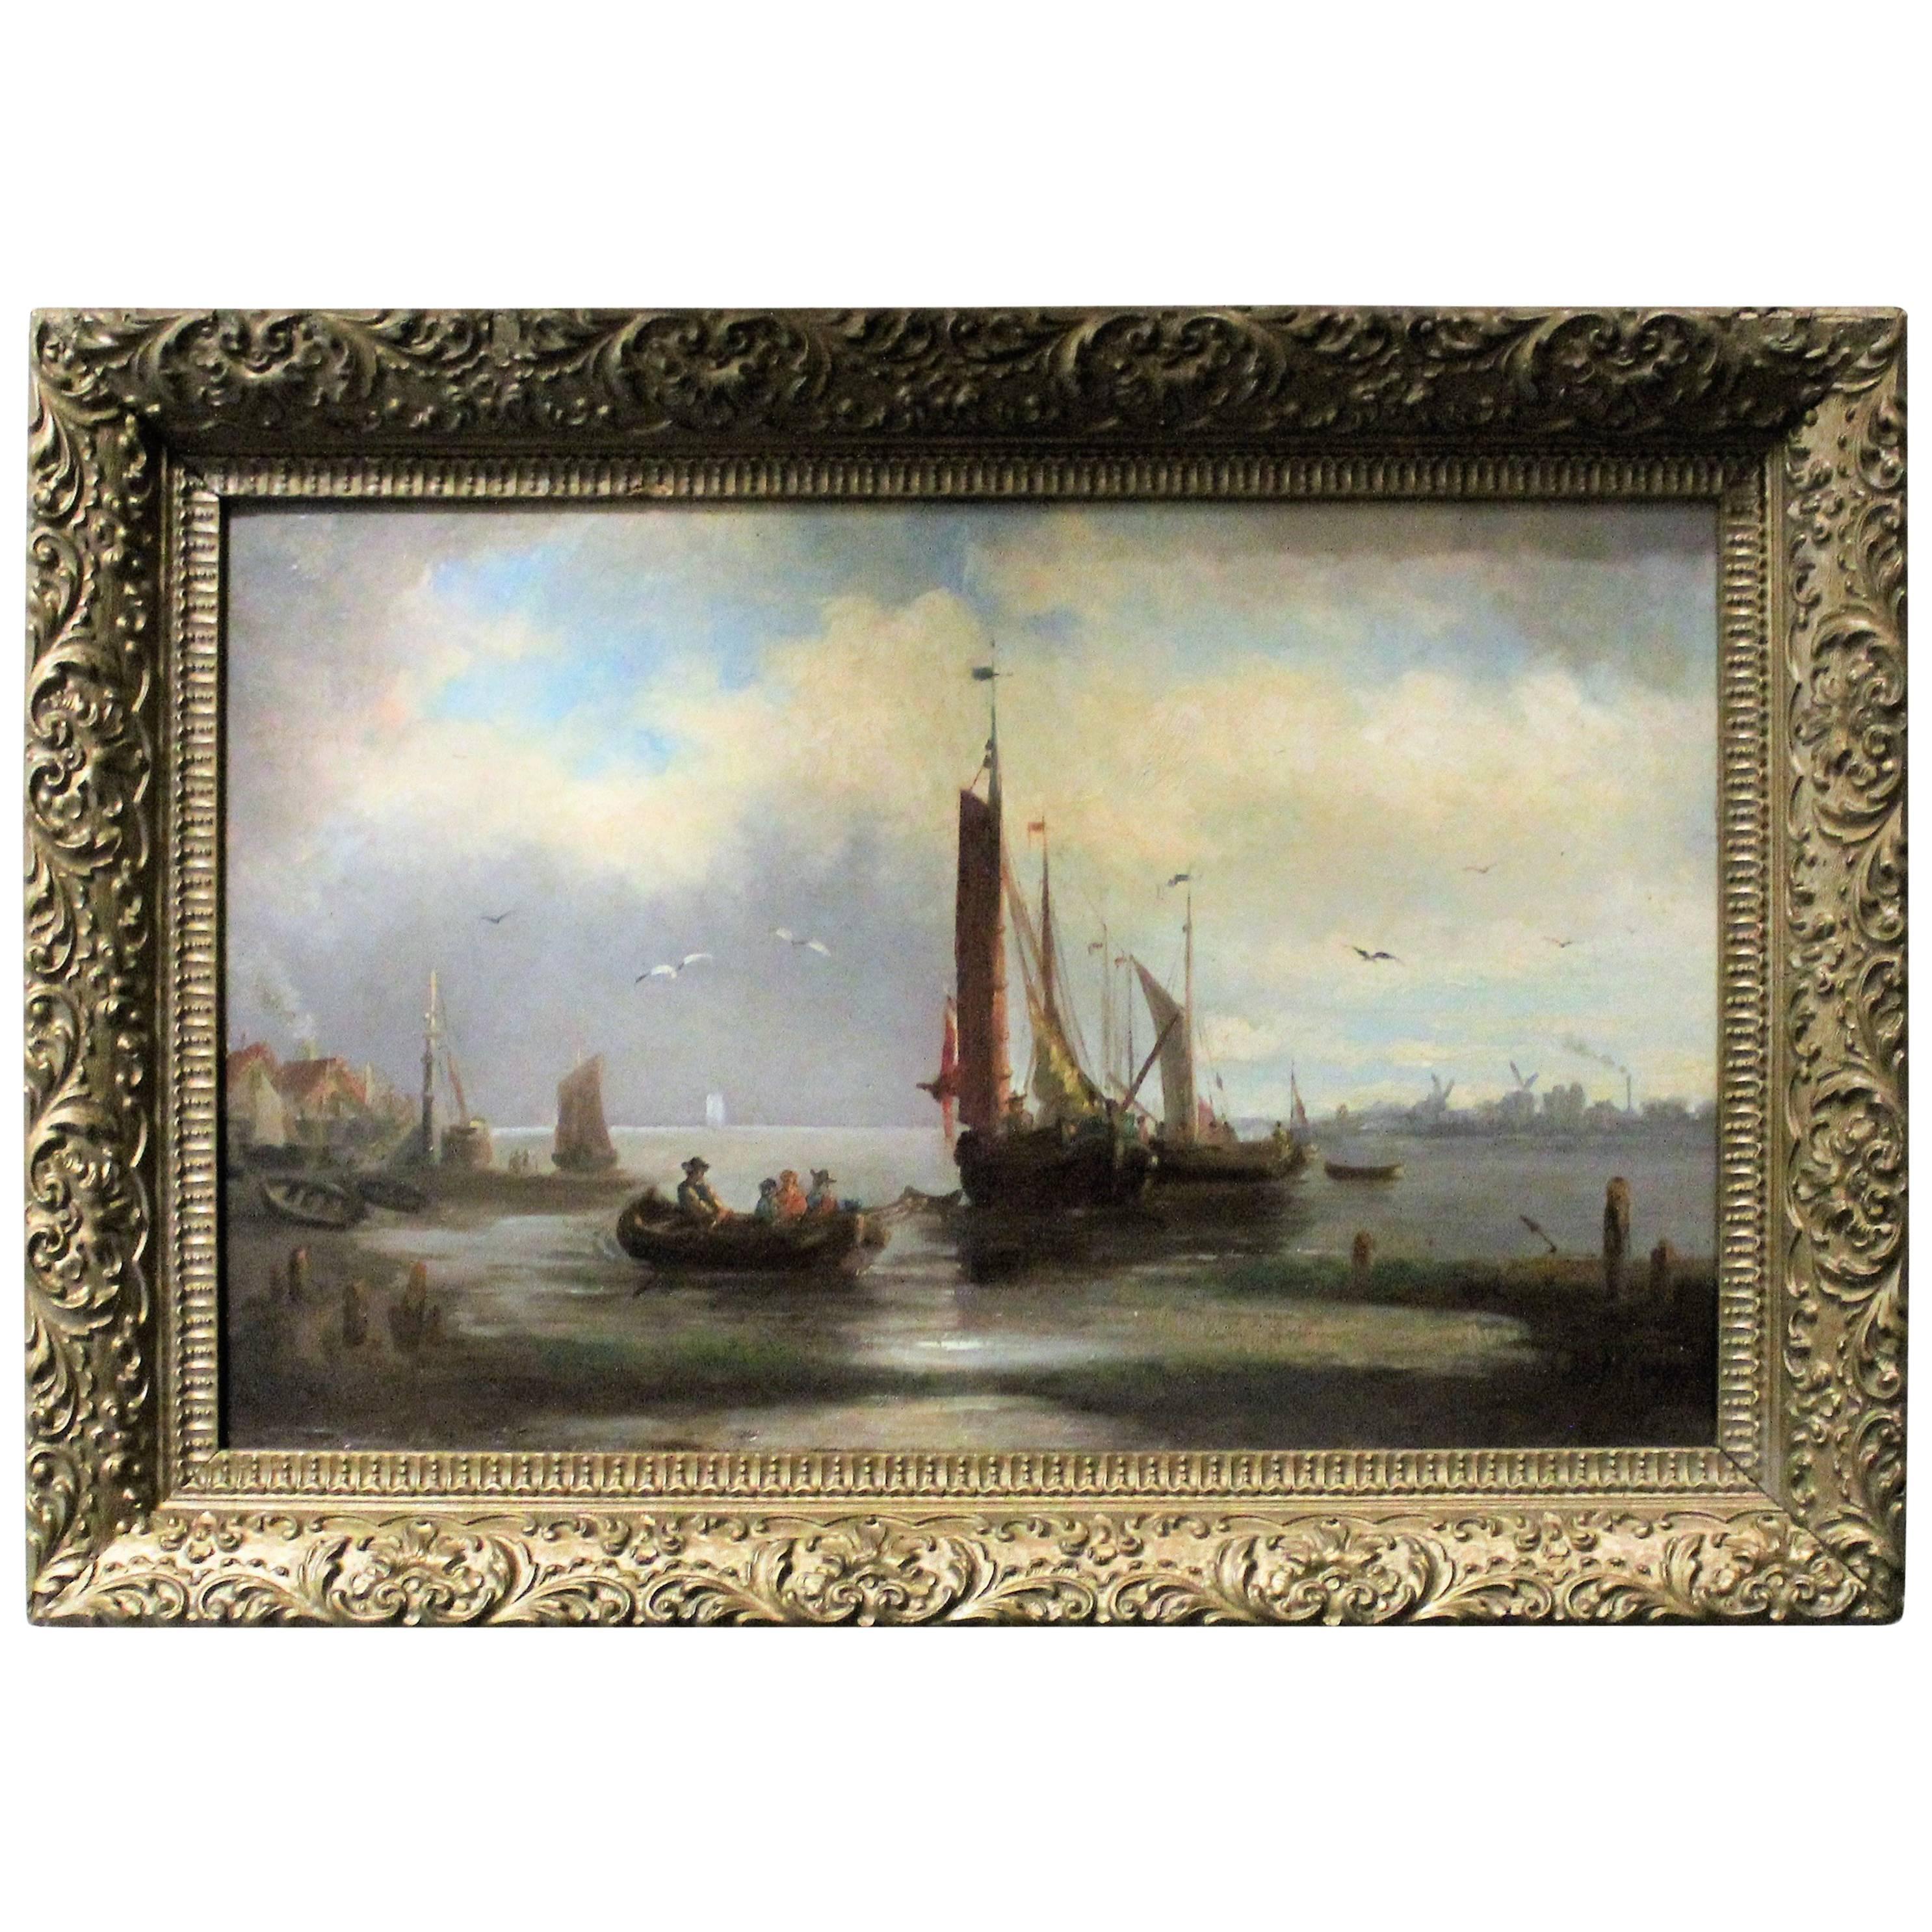 Abraham Hulk Senior (England/Netherlands 1813-1897)
Oil on board

With frame: 19" wide x 13.5" high
Without frame: 16" wide x 10" high.